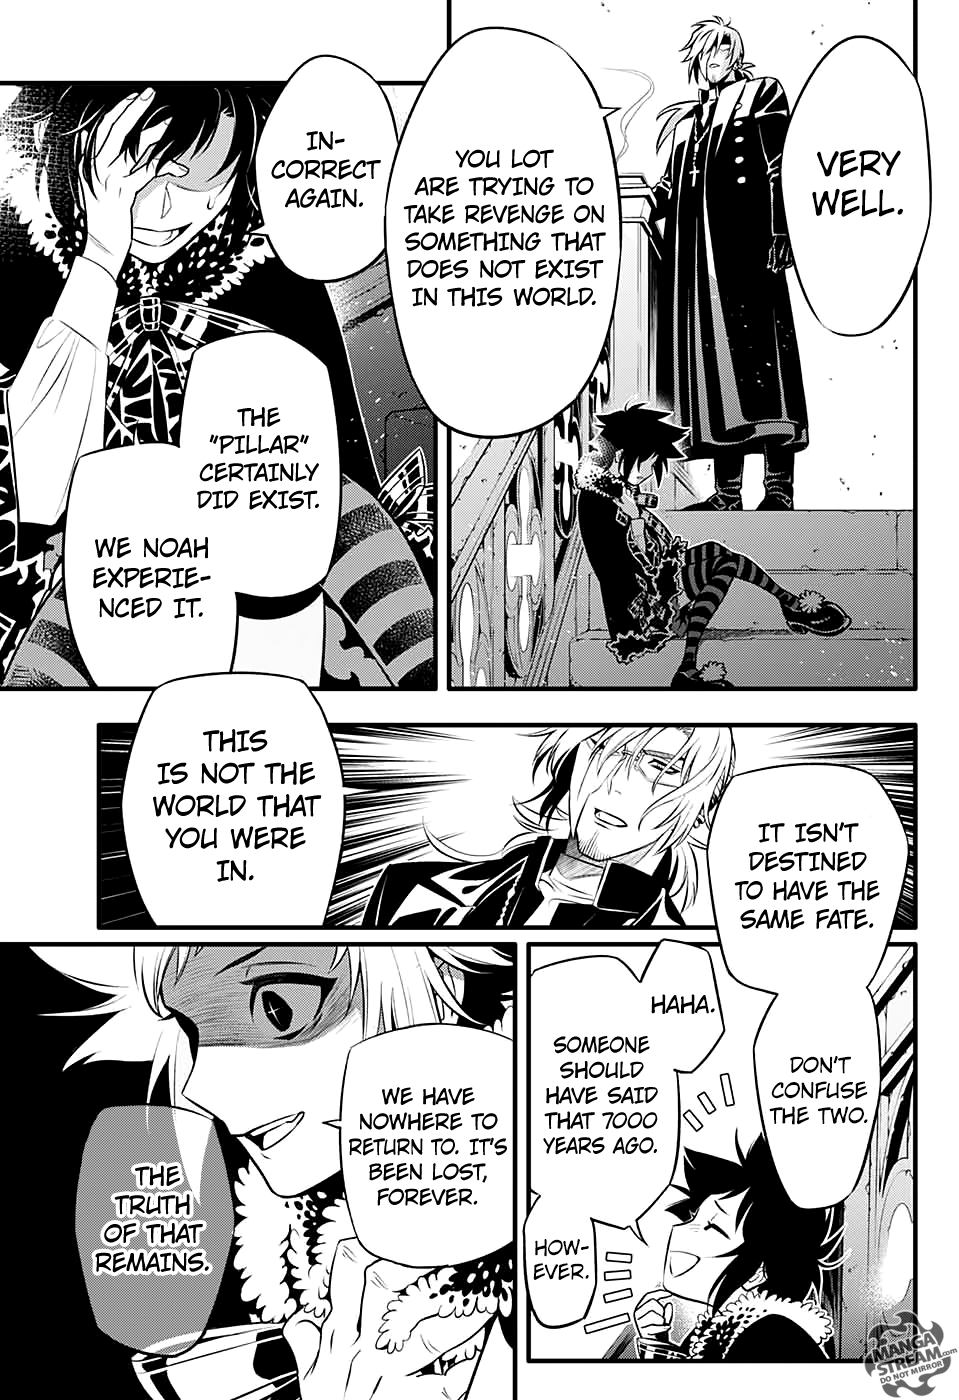 D.Gray-man chapter 234 page 15